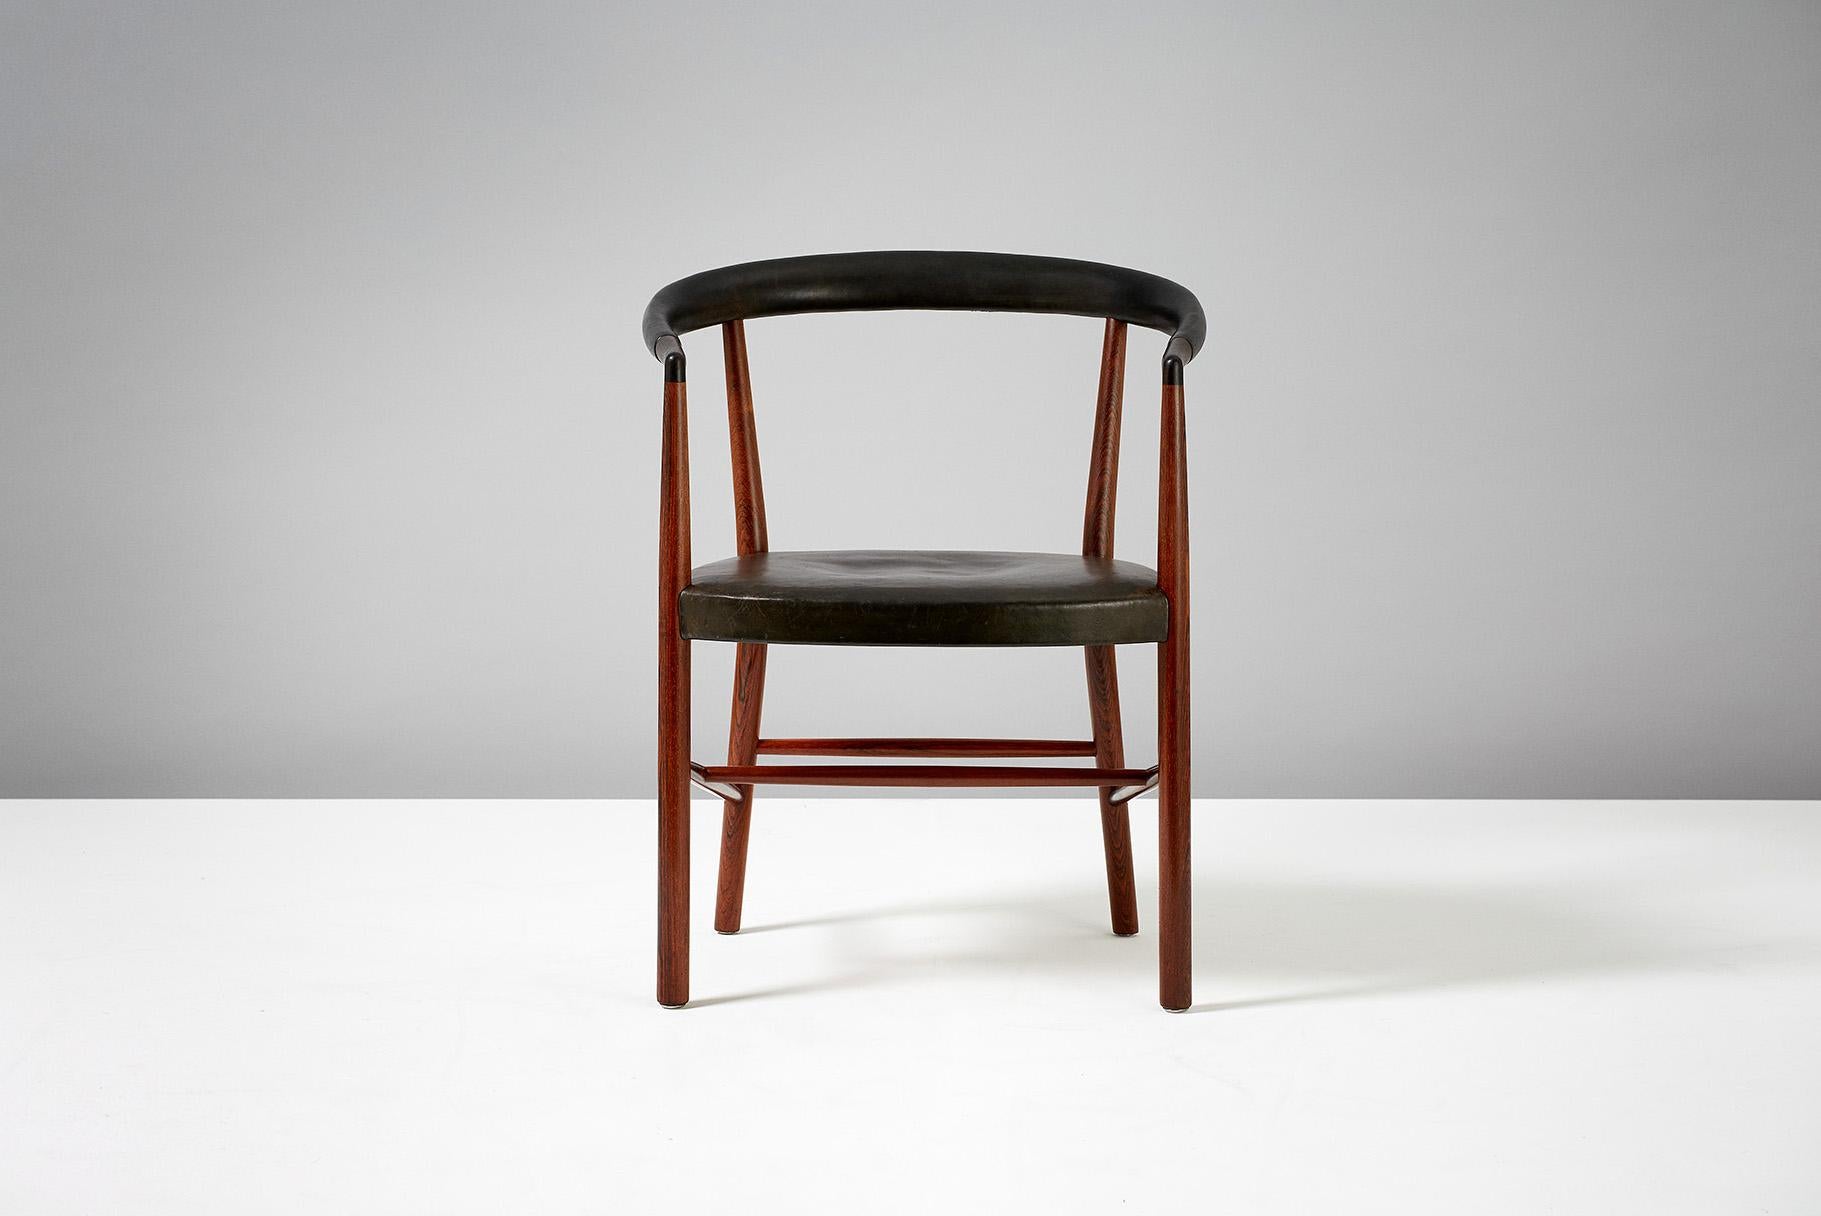 Jacob Kjaer 

UN Chair, 1949

Model B-37 armchair designed in 1949 for the UN headquarters in New York. Produced in Brazilian rosewood with seat and back upholstered with original black patinated leather. This example made approximately